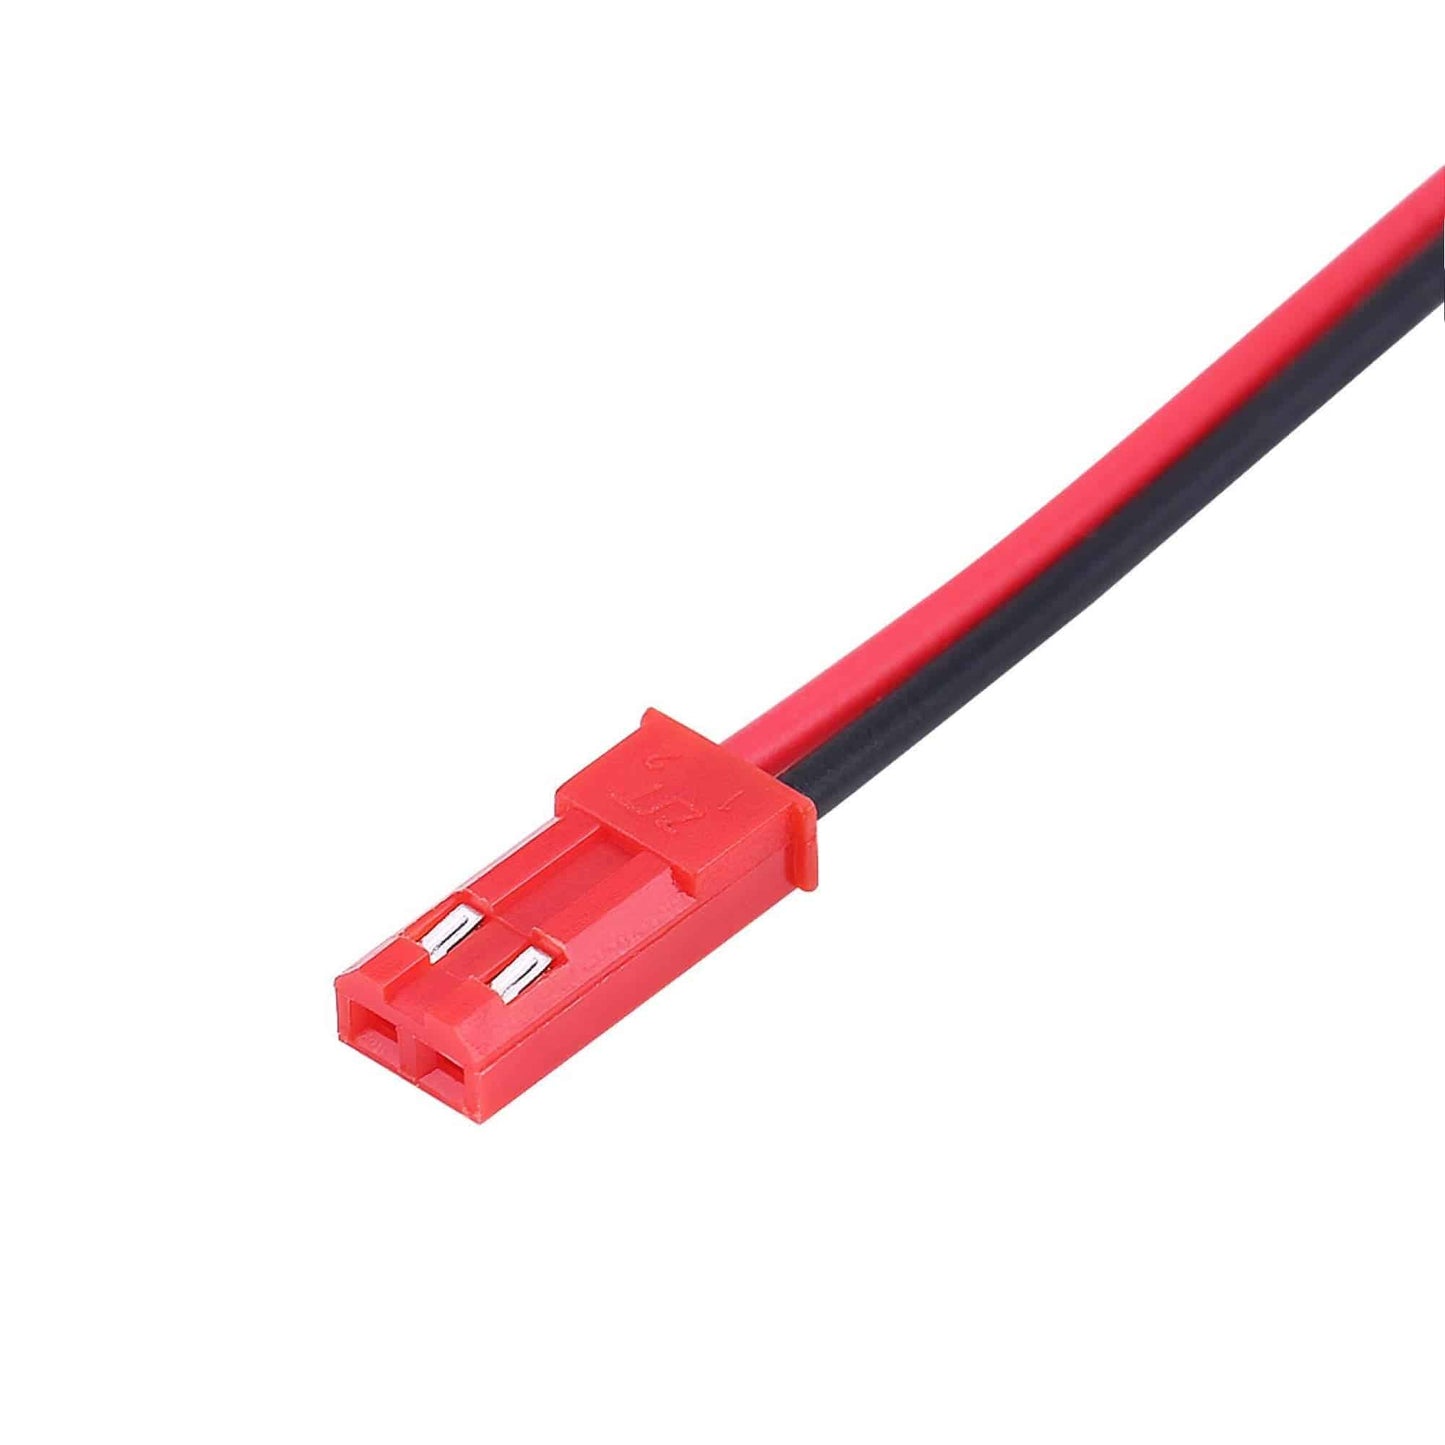 2 Pin Female JST Connector